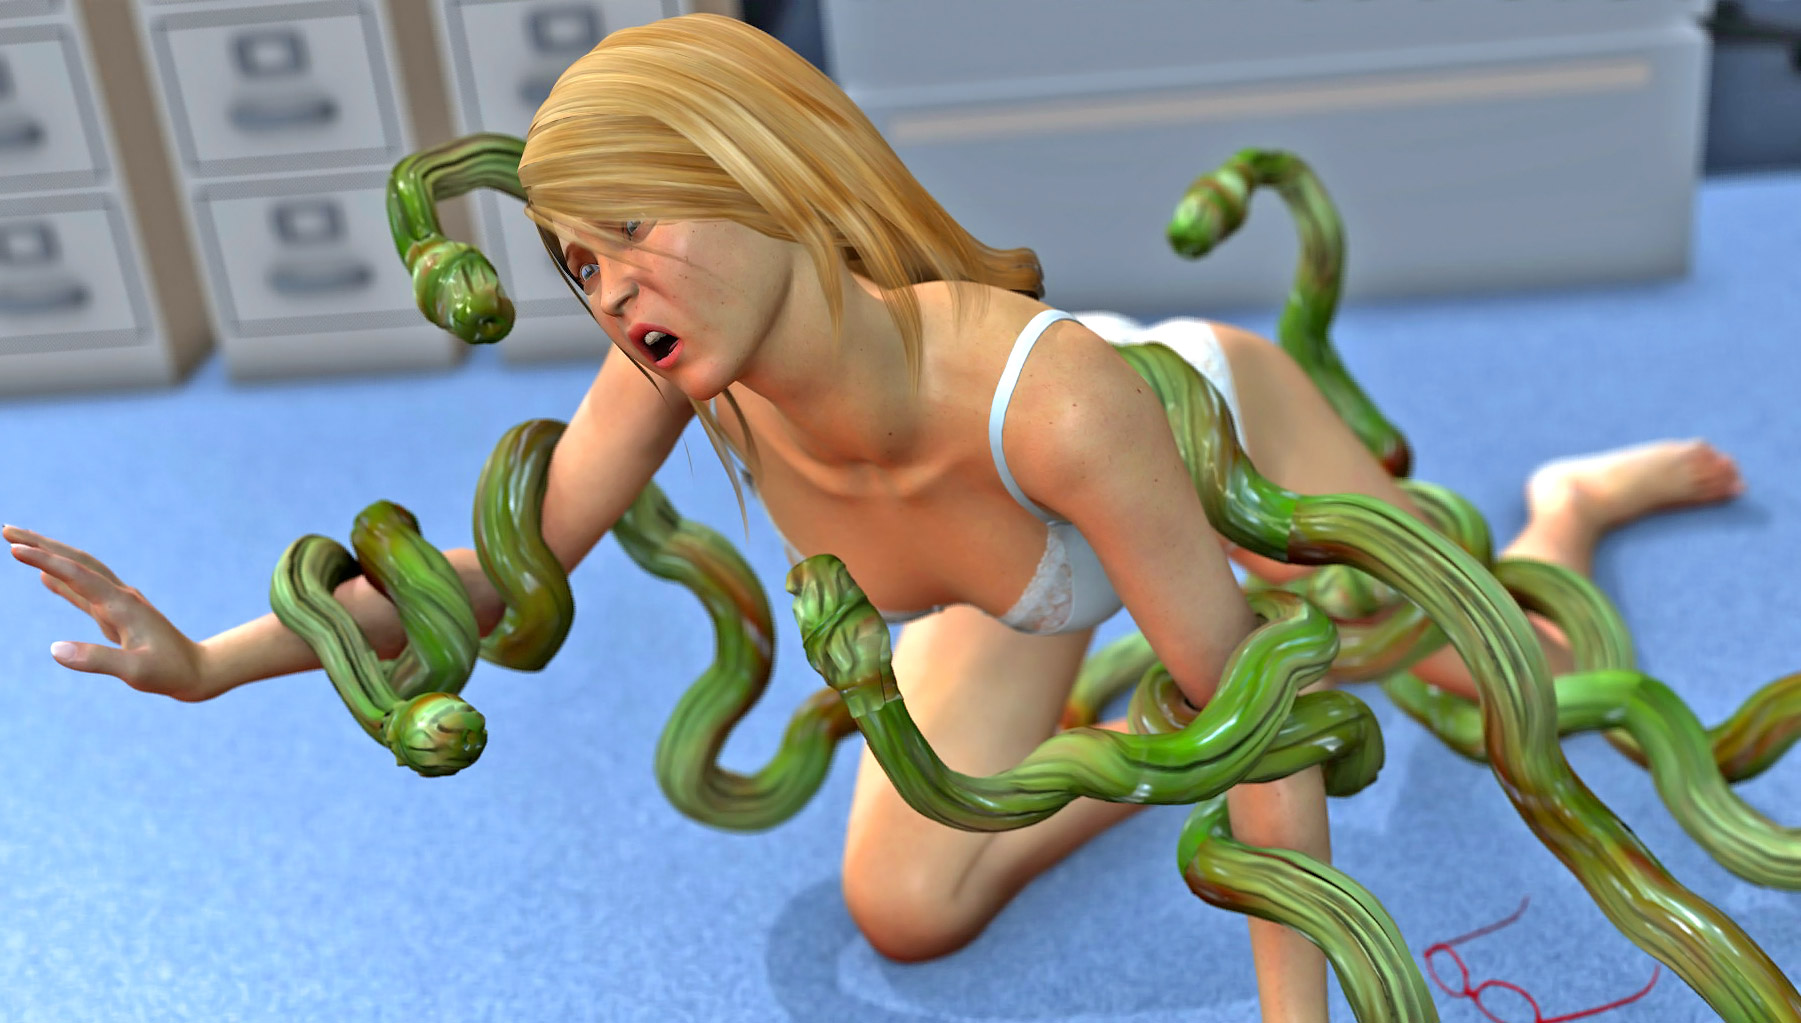 1801px x 1023px - Kinky 3d tentacle porn with a hot babe at 3dEvilMonsters